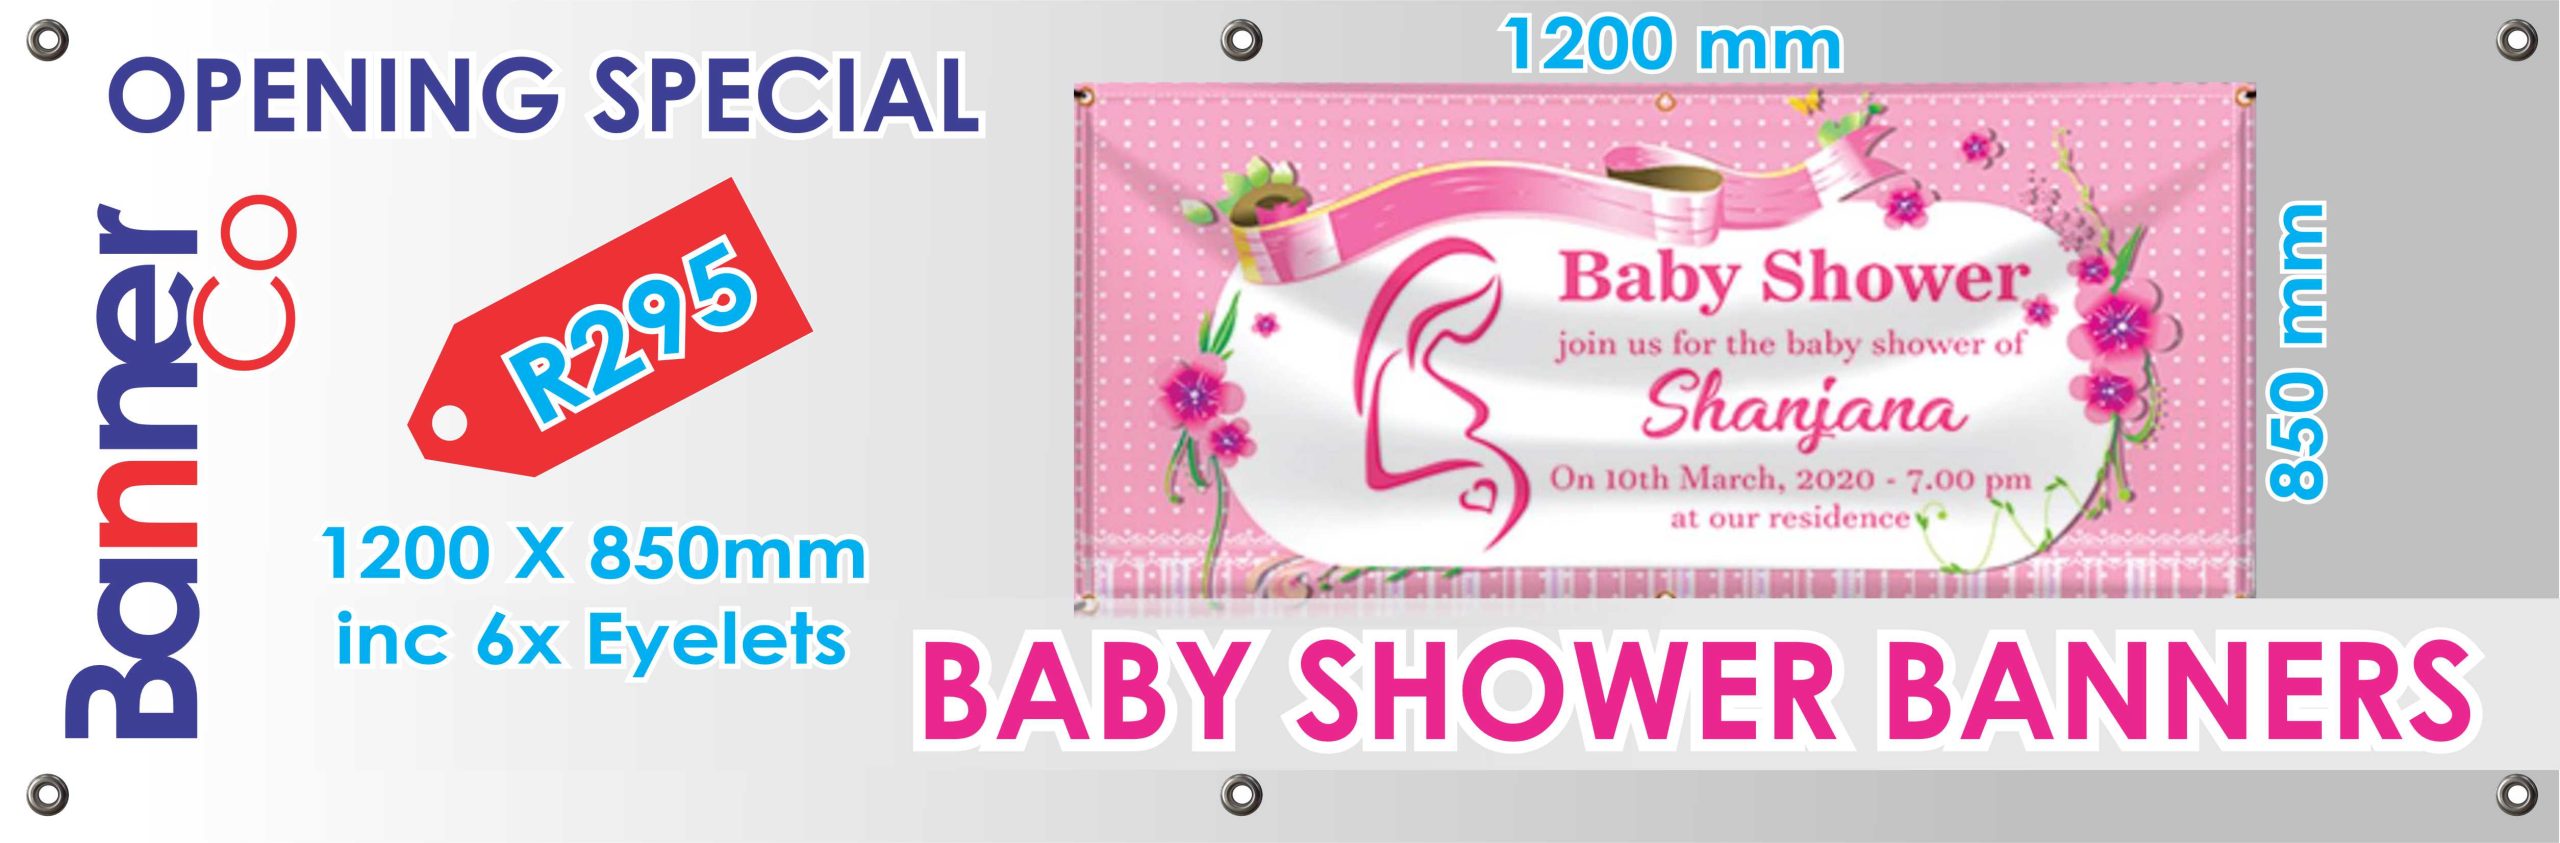 BABY SHOWER BANNERS